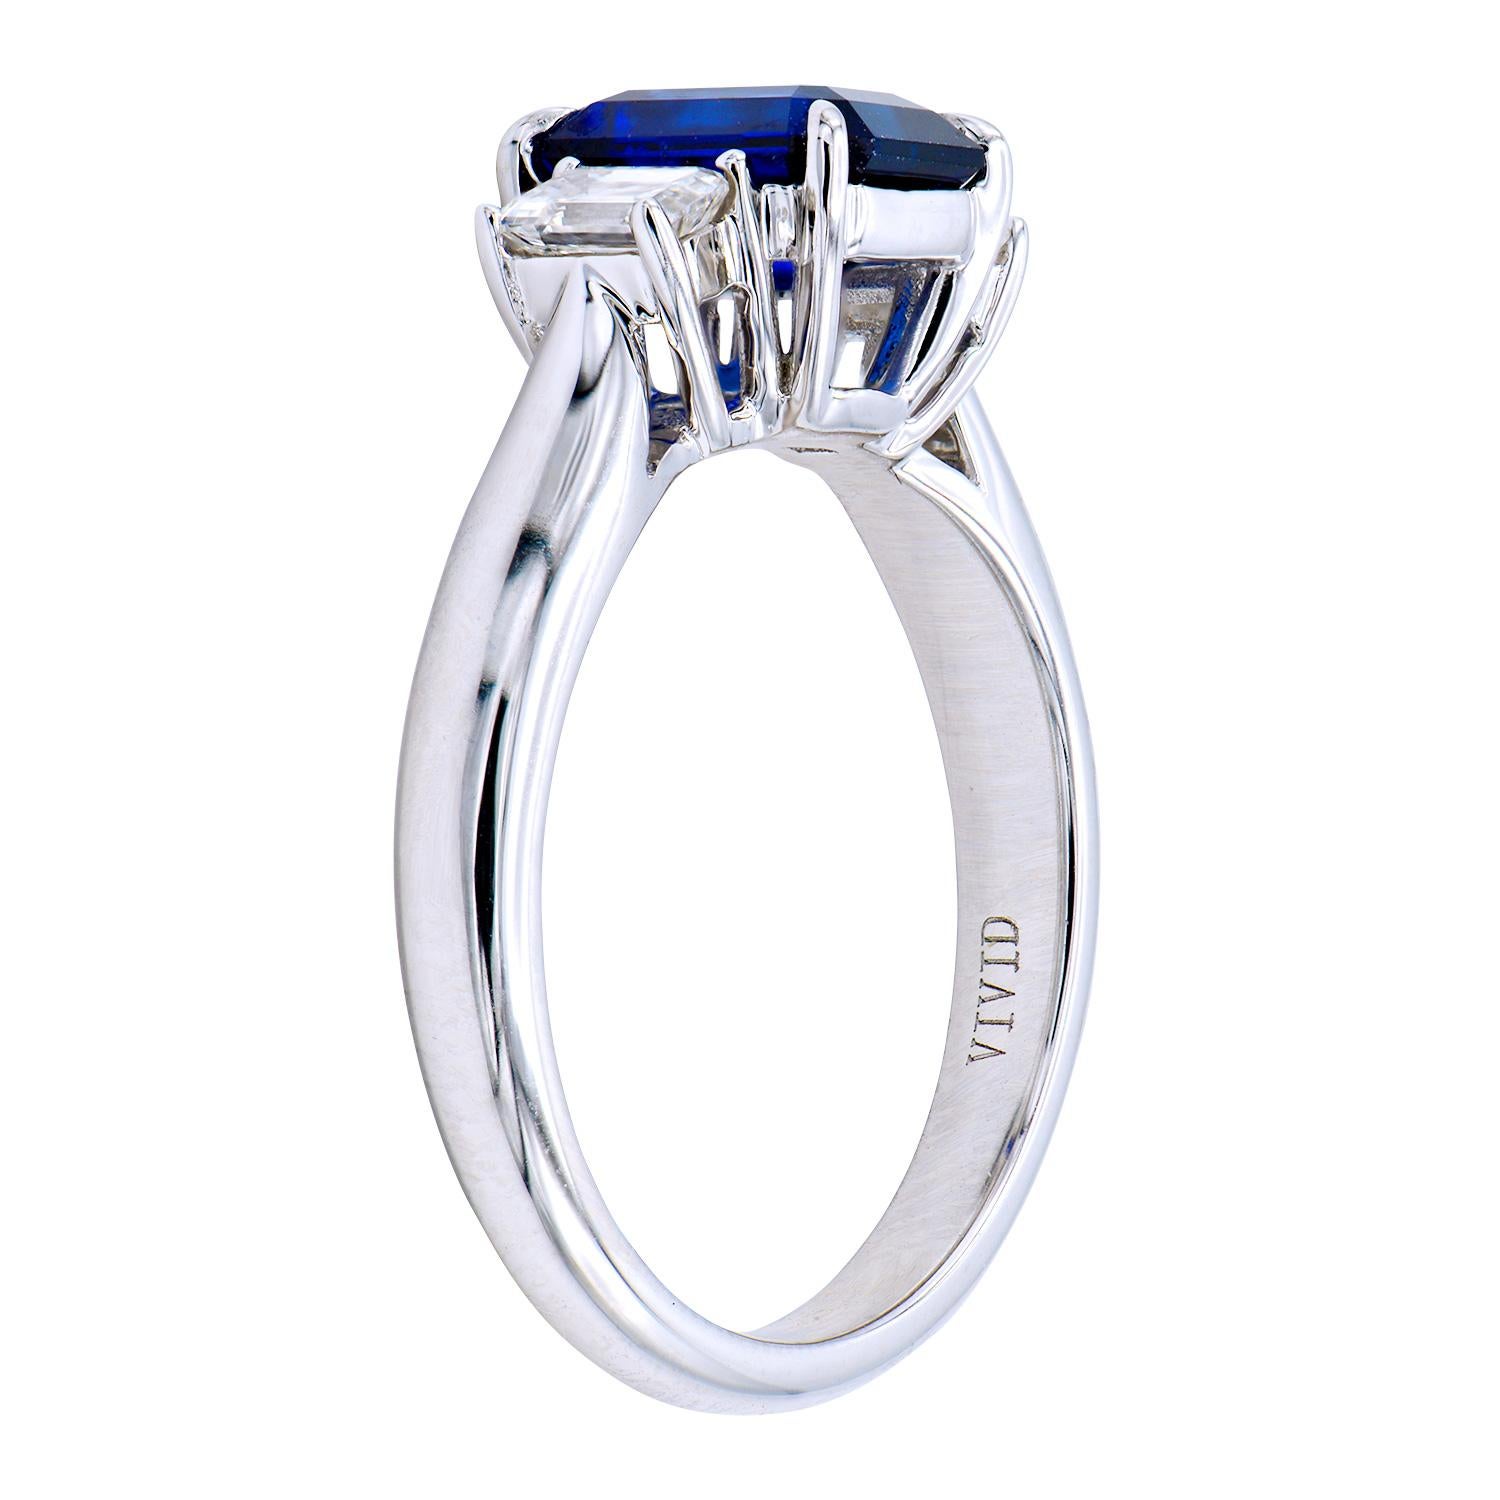 This gorgeous 1.85 carat Ceylon, Emerald Cut, Blue Sapphire is set in 4.6 grams of 18 karat white gold. On either side of the sapphire are 2 Emerald-cut Diamonds totaling 0.43 carats. All together they make a stunning three-stone ring that is a size